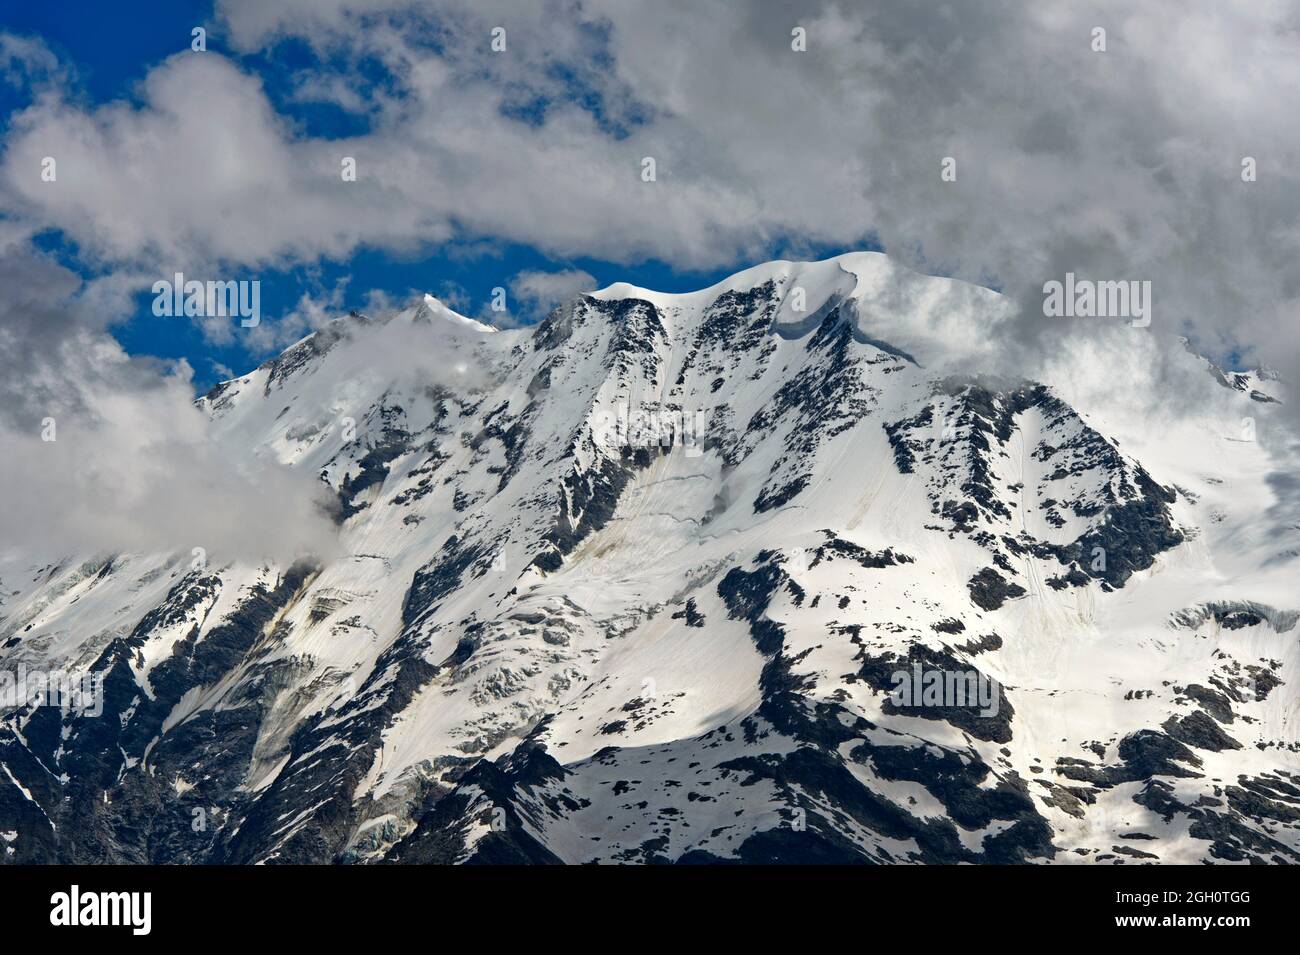 Snow-covered peaks in the Swiss Alps, Saas-Fee, Valais, Switzerland. Stock Photo